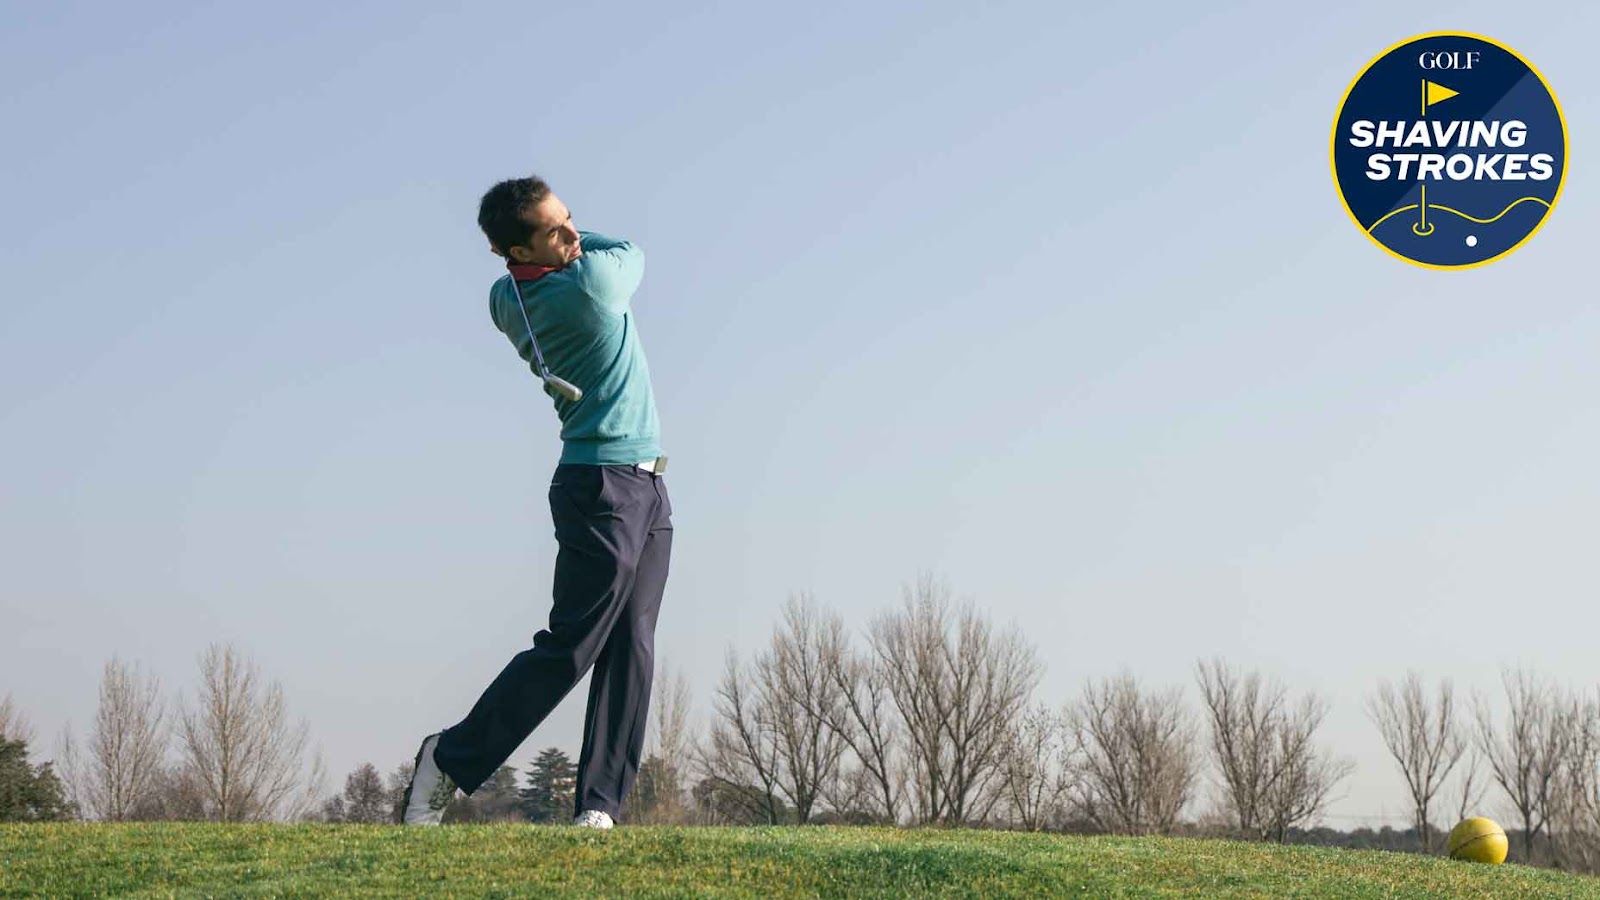 If you're struggling with early extension, GOLF Top 100 Teacher Jonathan Yarwood says one move can help improve your ball-striking ability